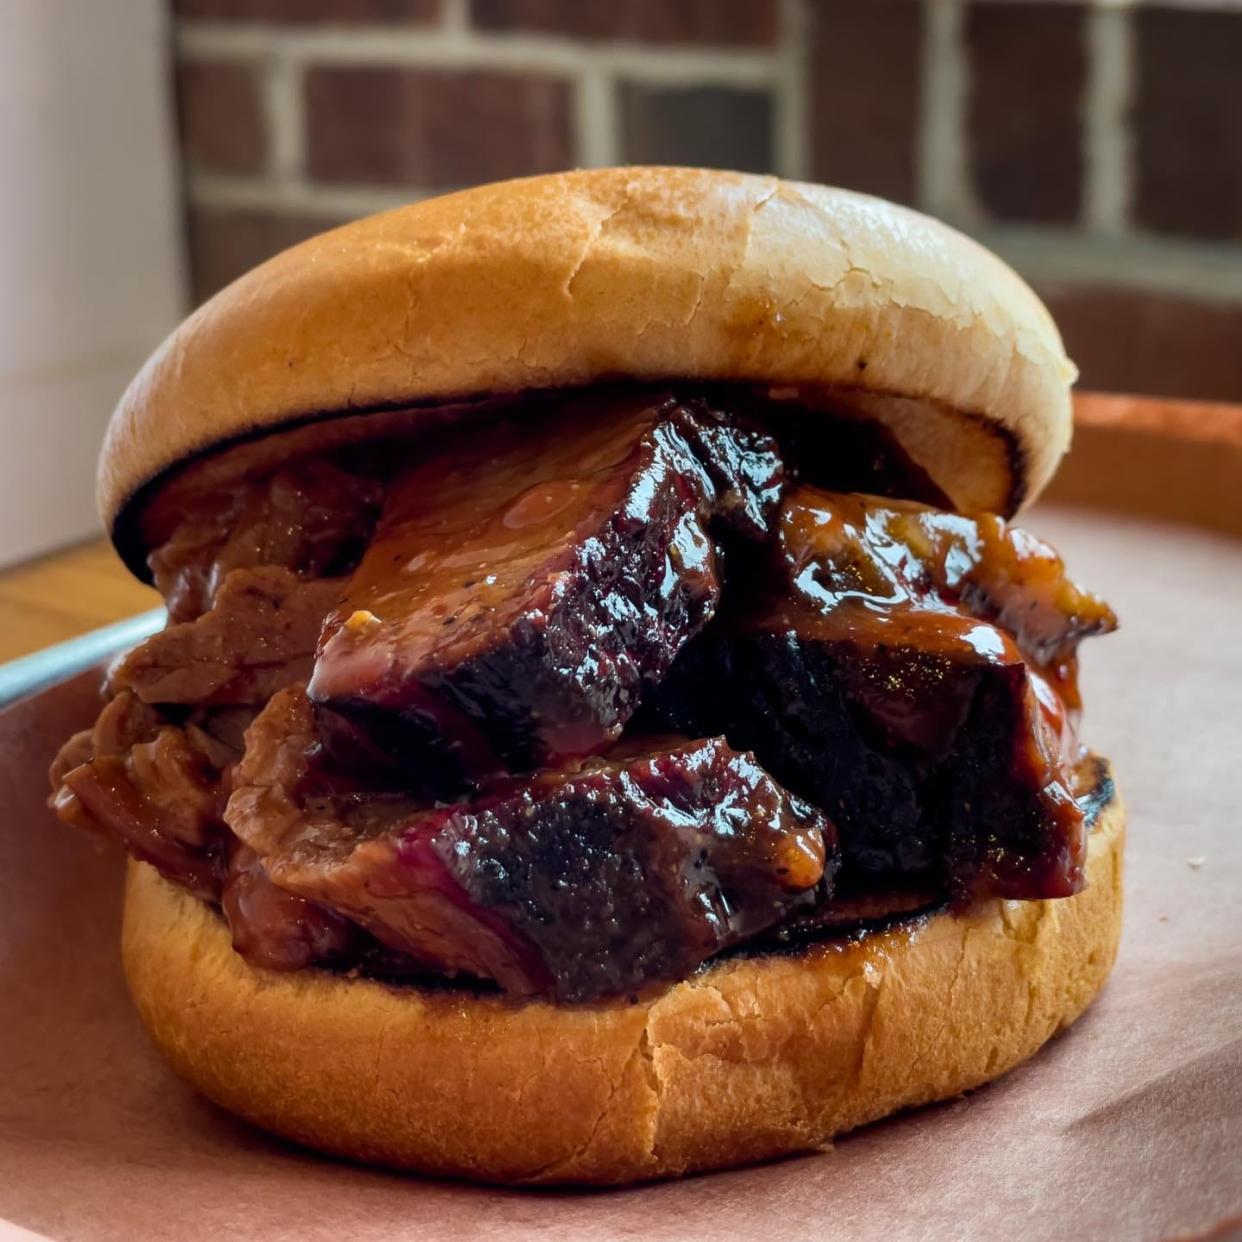 This brisket sandwich is just one of the many offerings at The Prized Pig in Mishawaka. The restaurant plans to relocate in the next year to a new larger space near Battell Park.